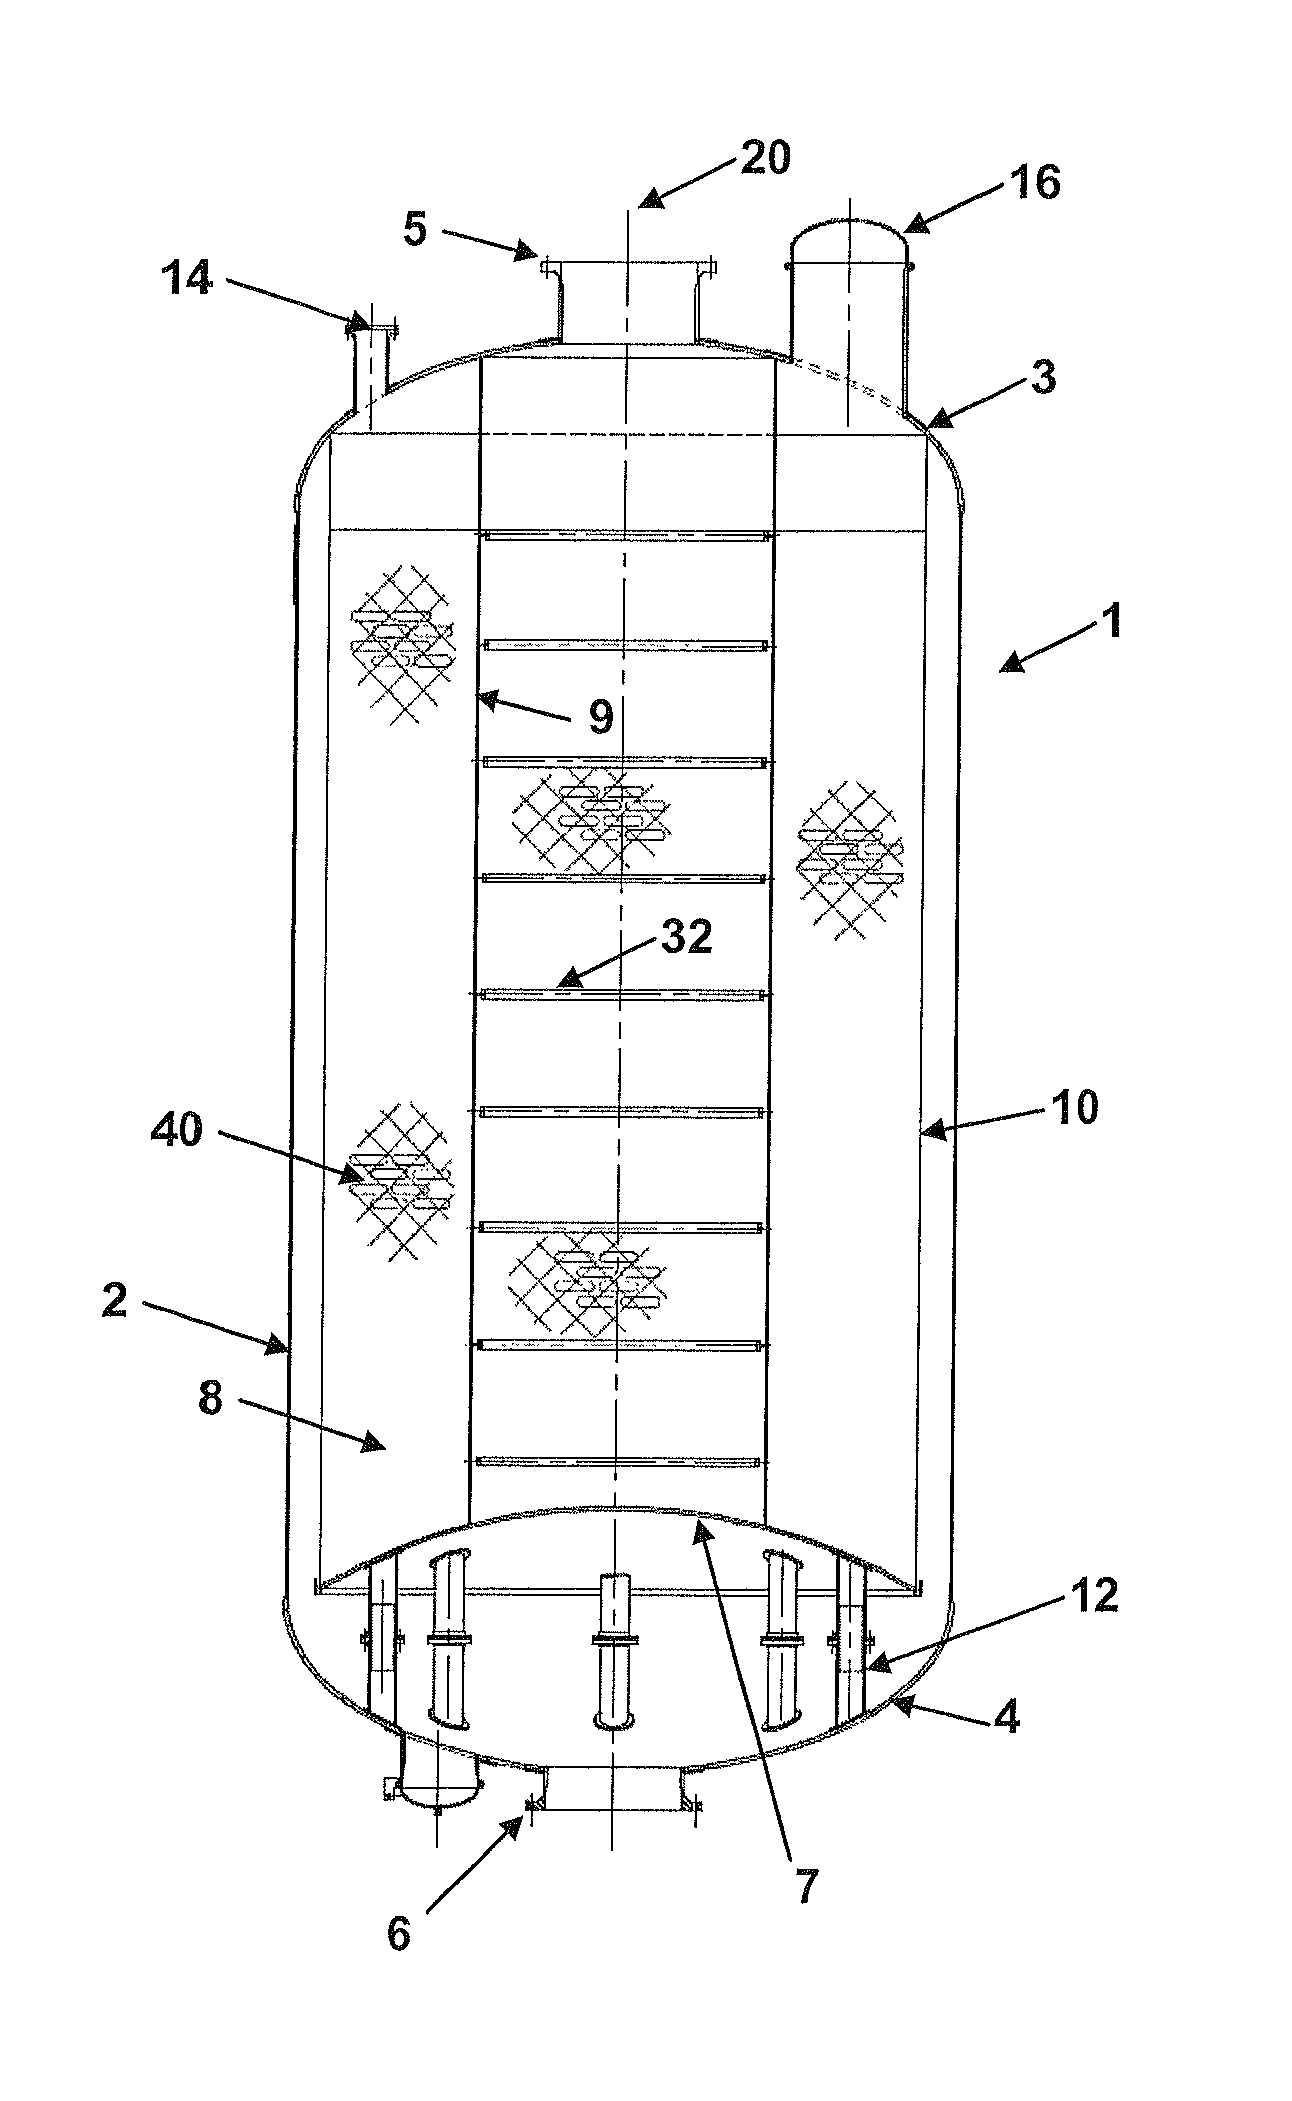 Radial flow reactor with movable supports